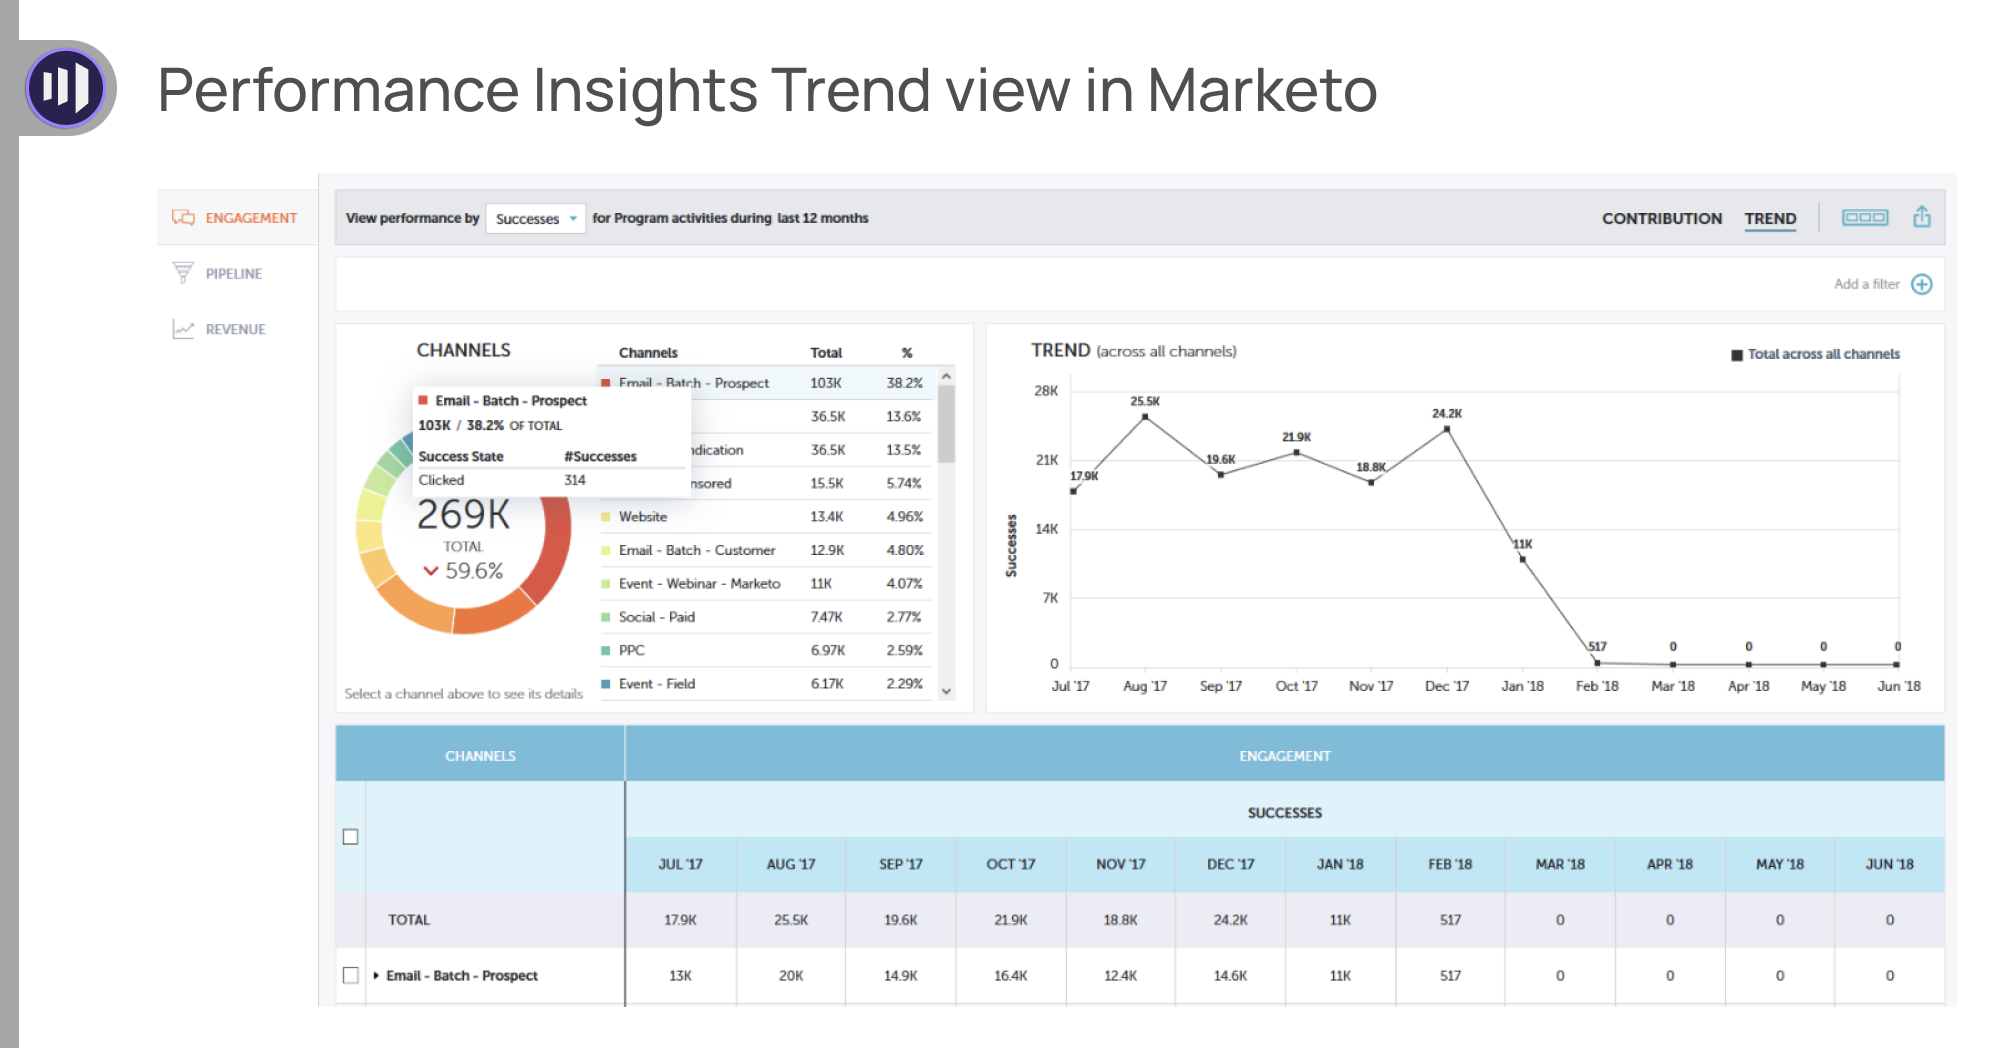 Performance Insights Trend view in Marketo